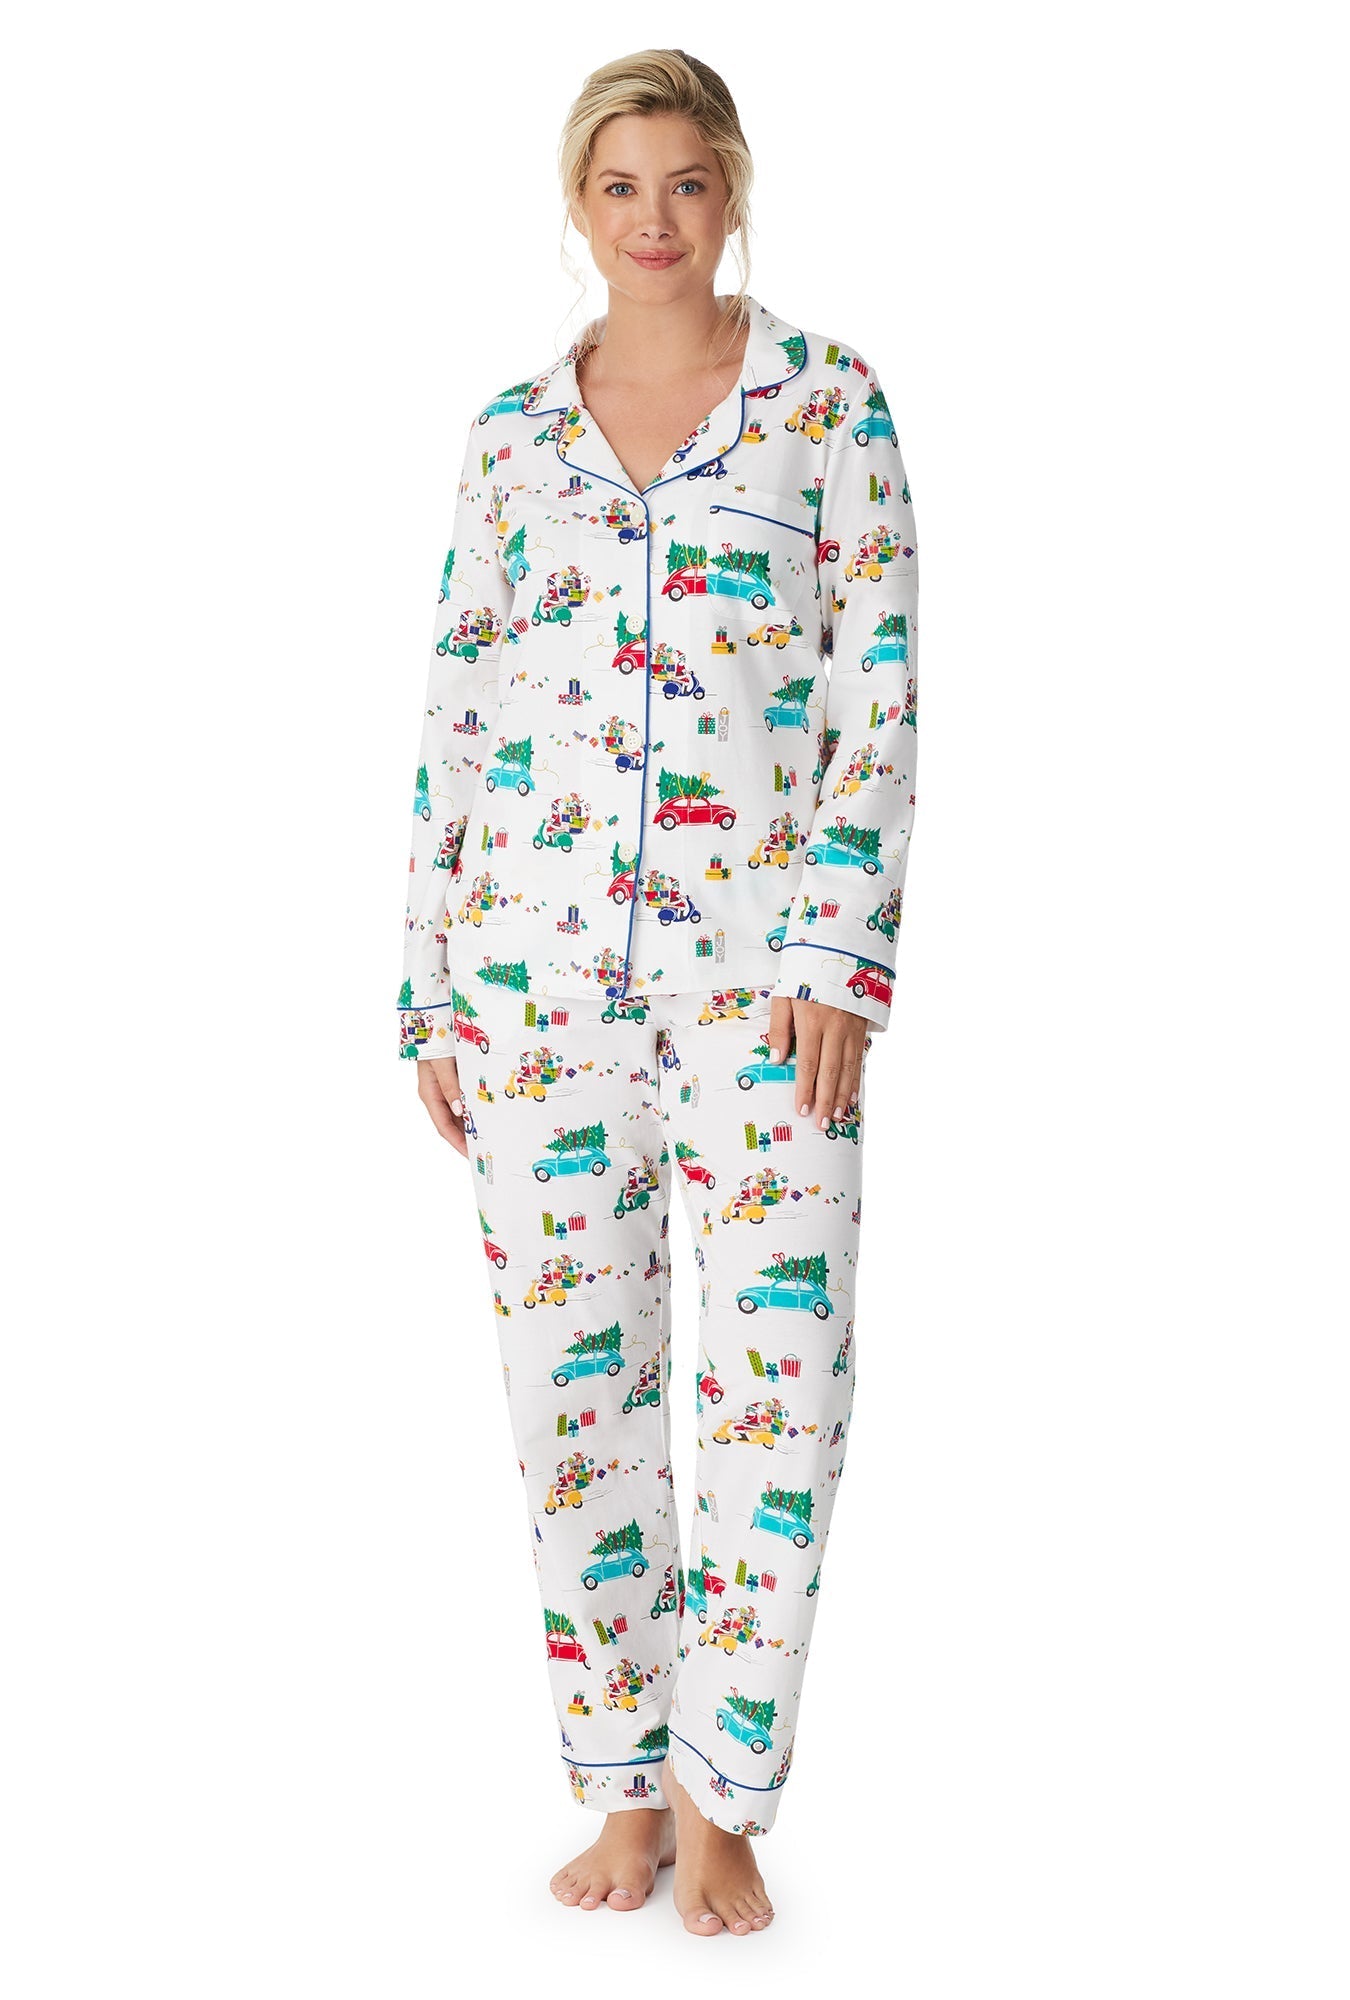 A lady wearing a white long sleeve pj set with readying for christmas views pattern.